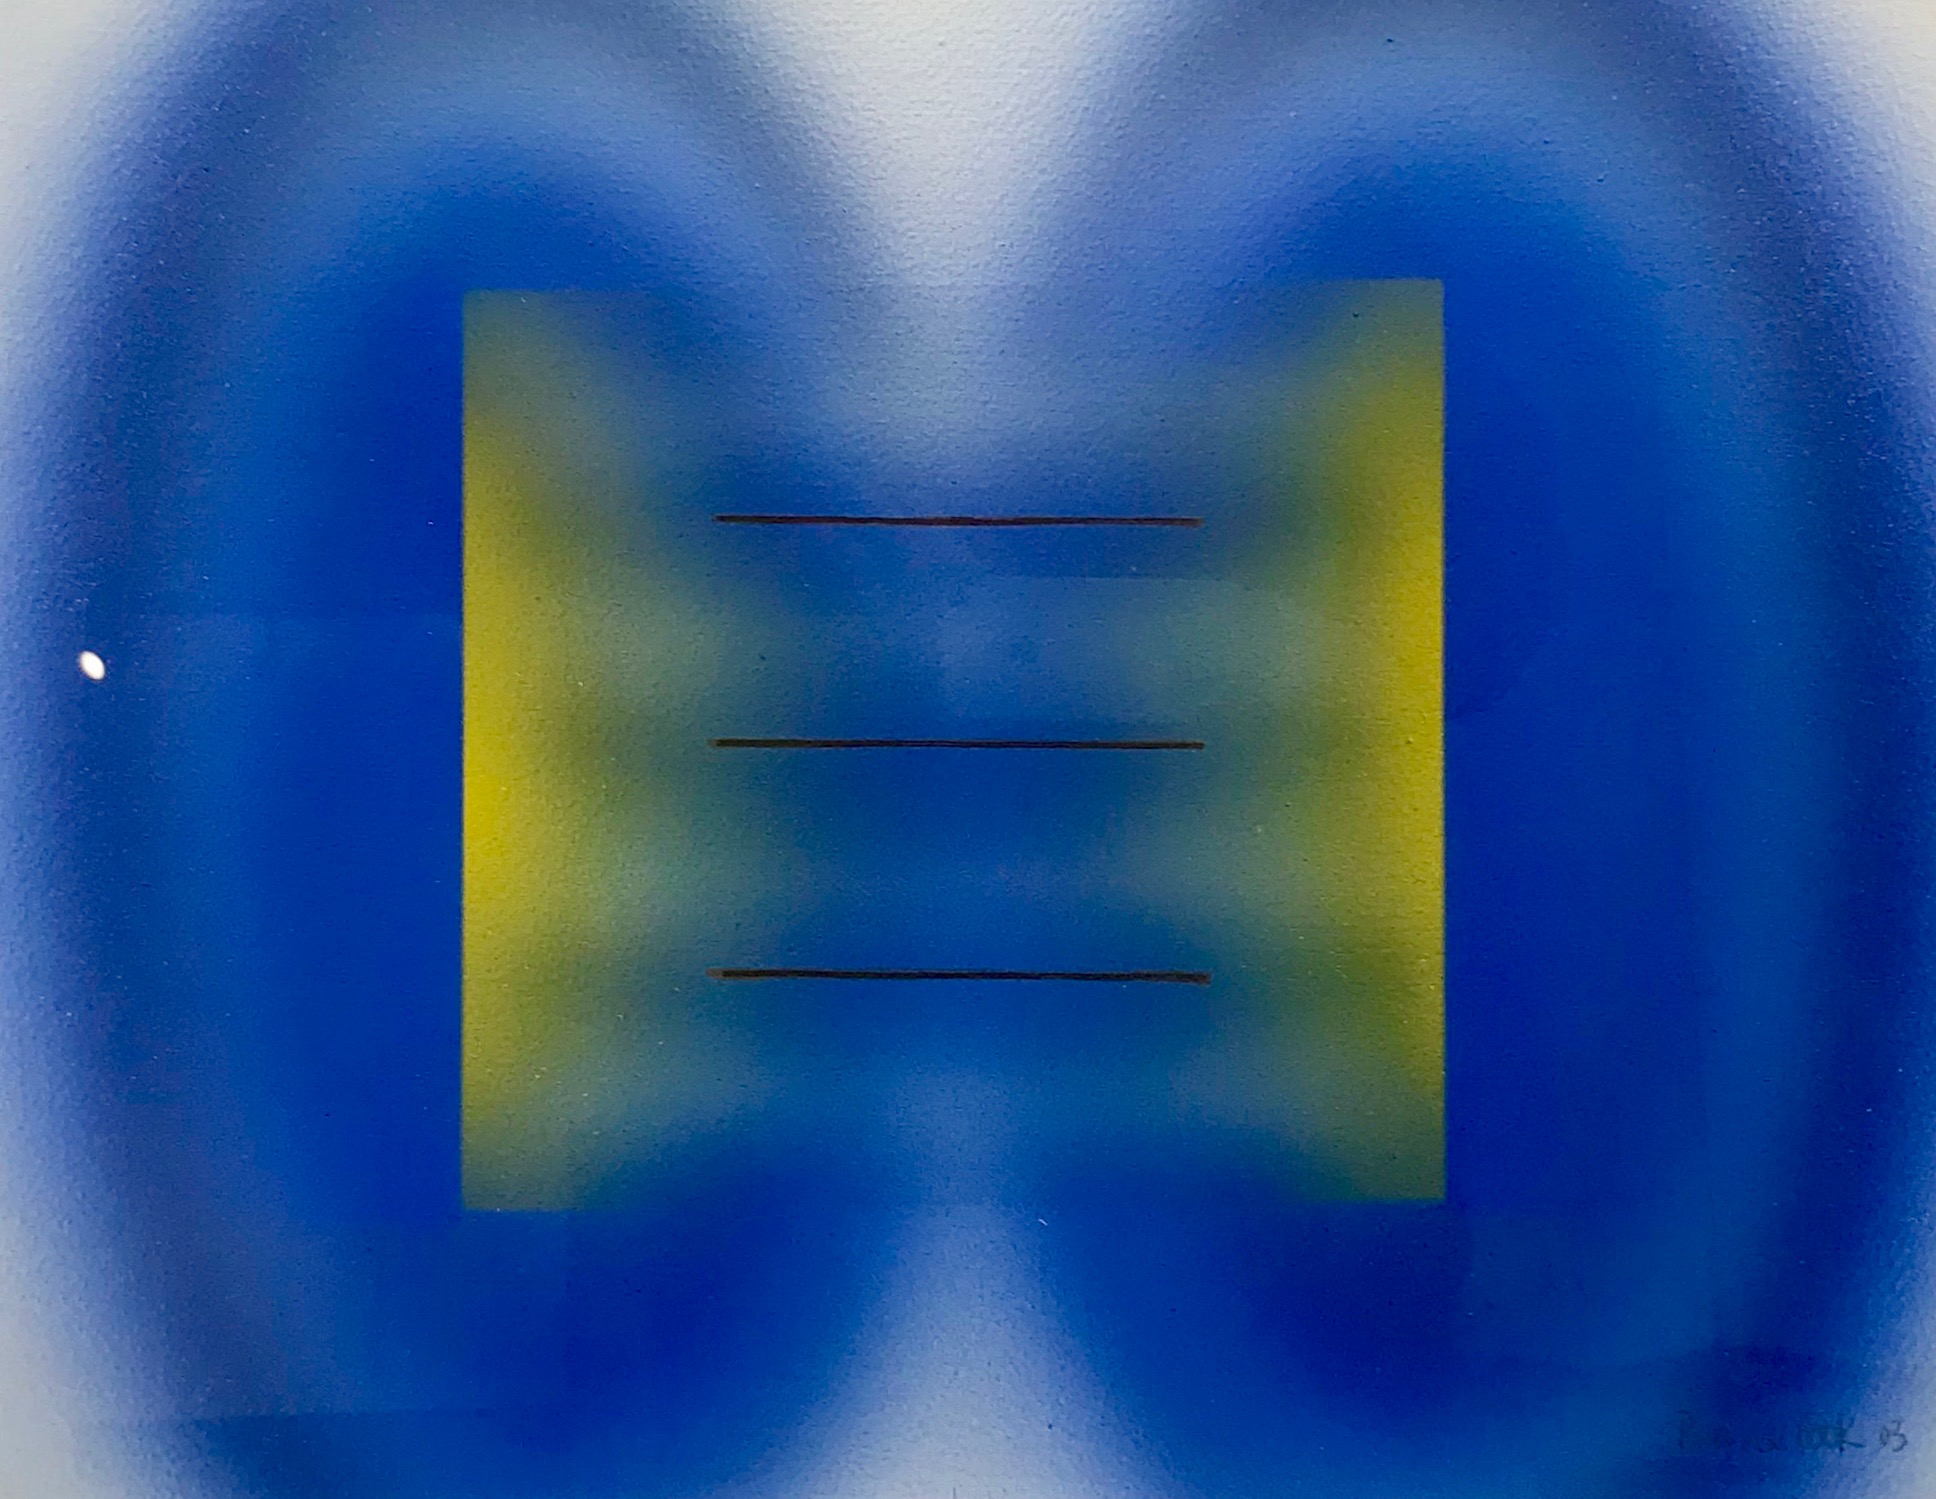 Barrie Cook (1929-) Blue Ovals, Yellow Square, signed and dated 03, 13" x 17.5".